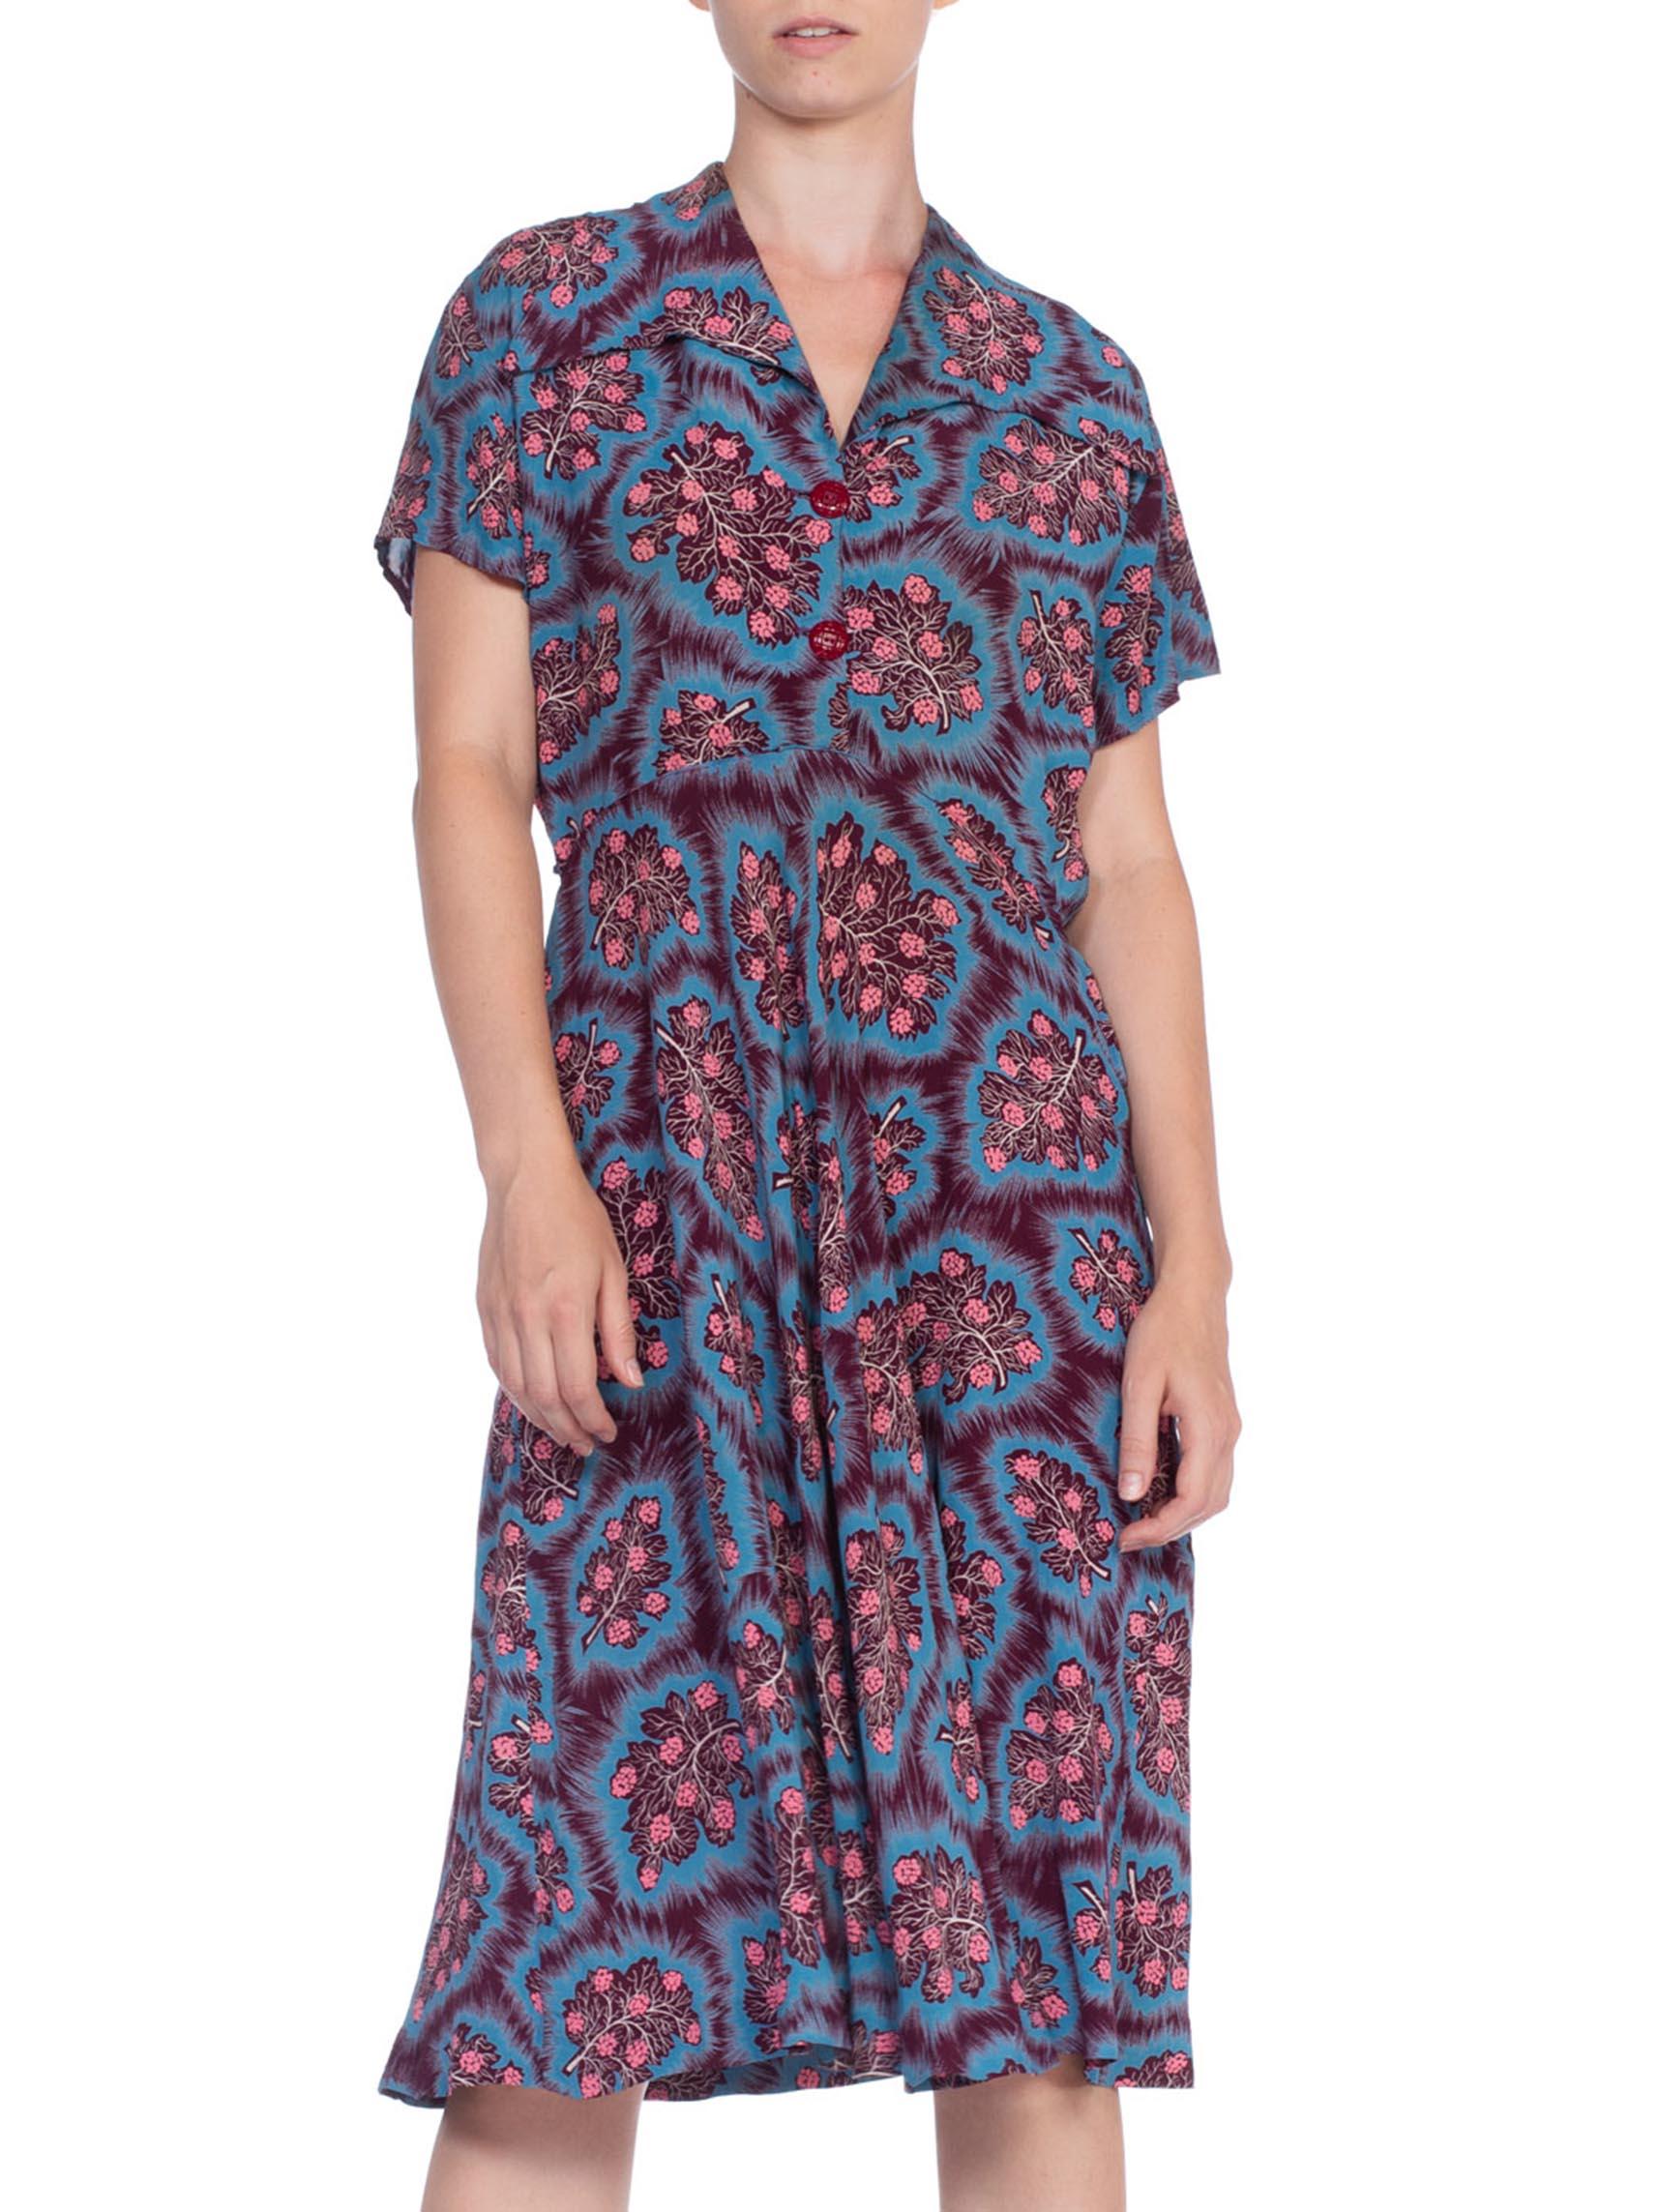 Women's 1940'S Purple & Blue Rayon Floral Printed Shirt Dress With Bias Cut Skirt For Sale